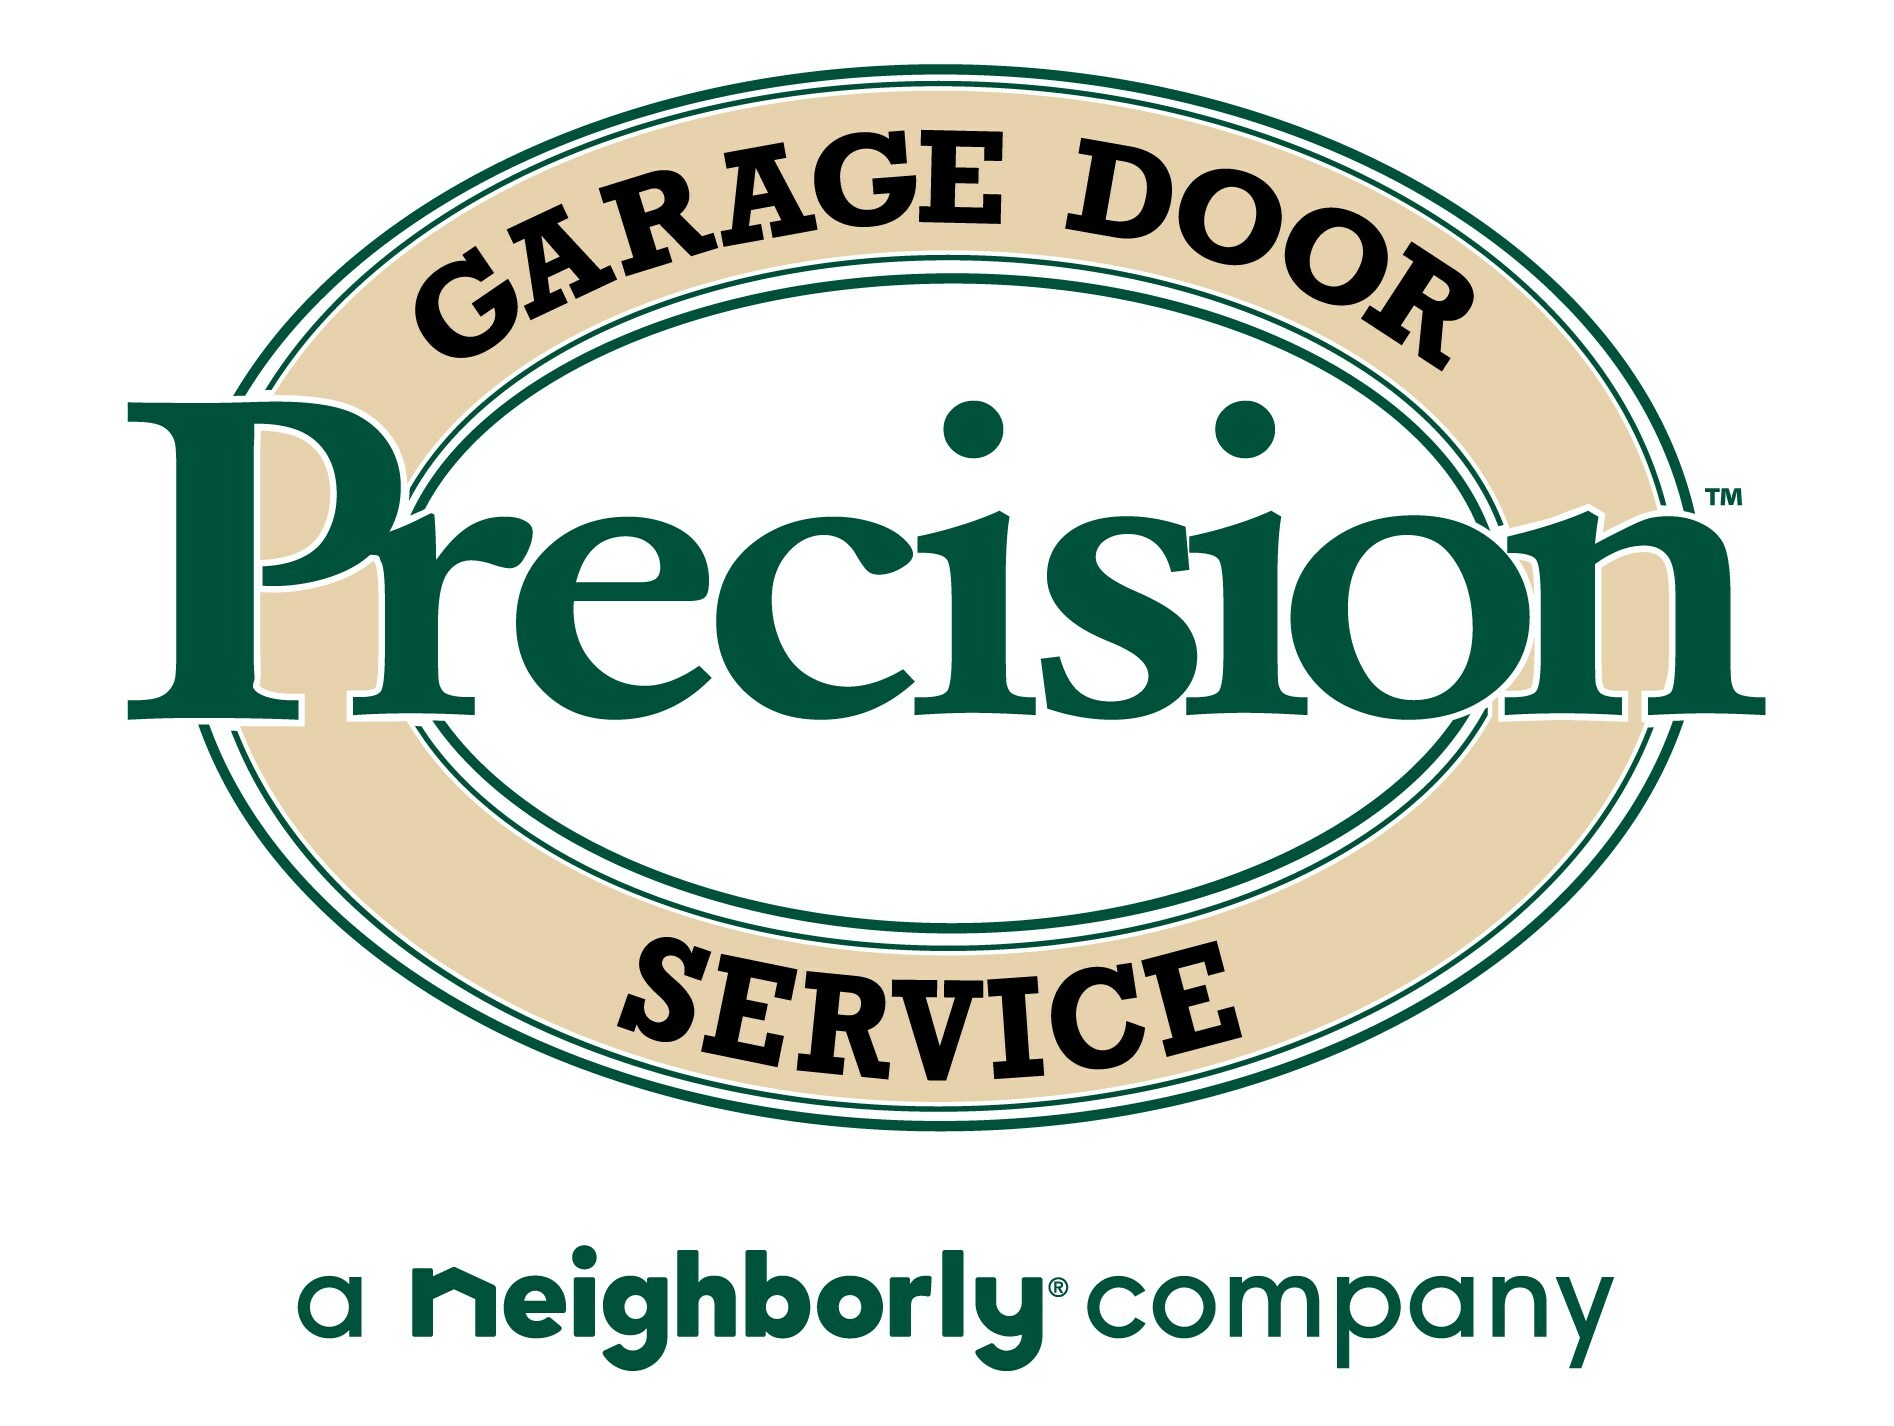 Precision Garage Door Service sponsors Bret Holmes Racing, adding a new level of excitement to their season. The partnership promises to bring expertise and excellence to the racing team.